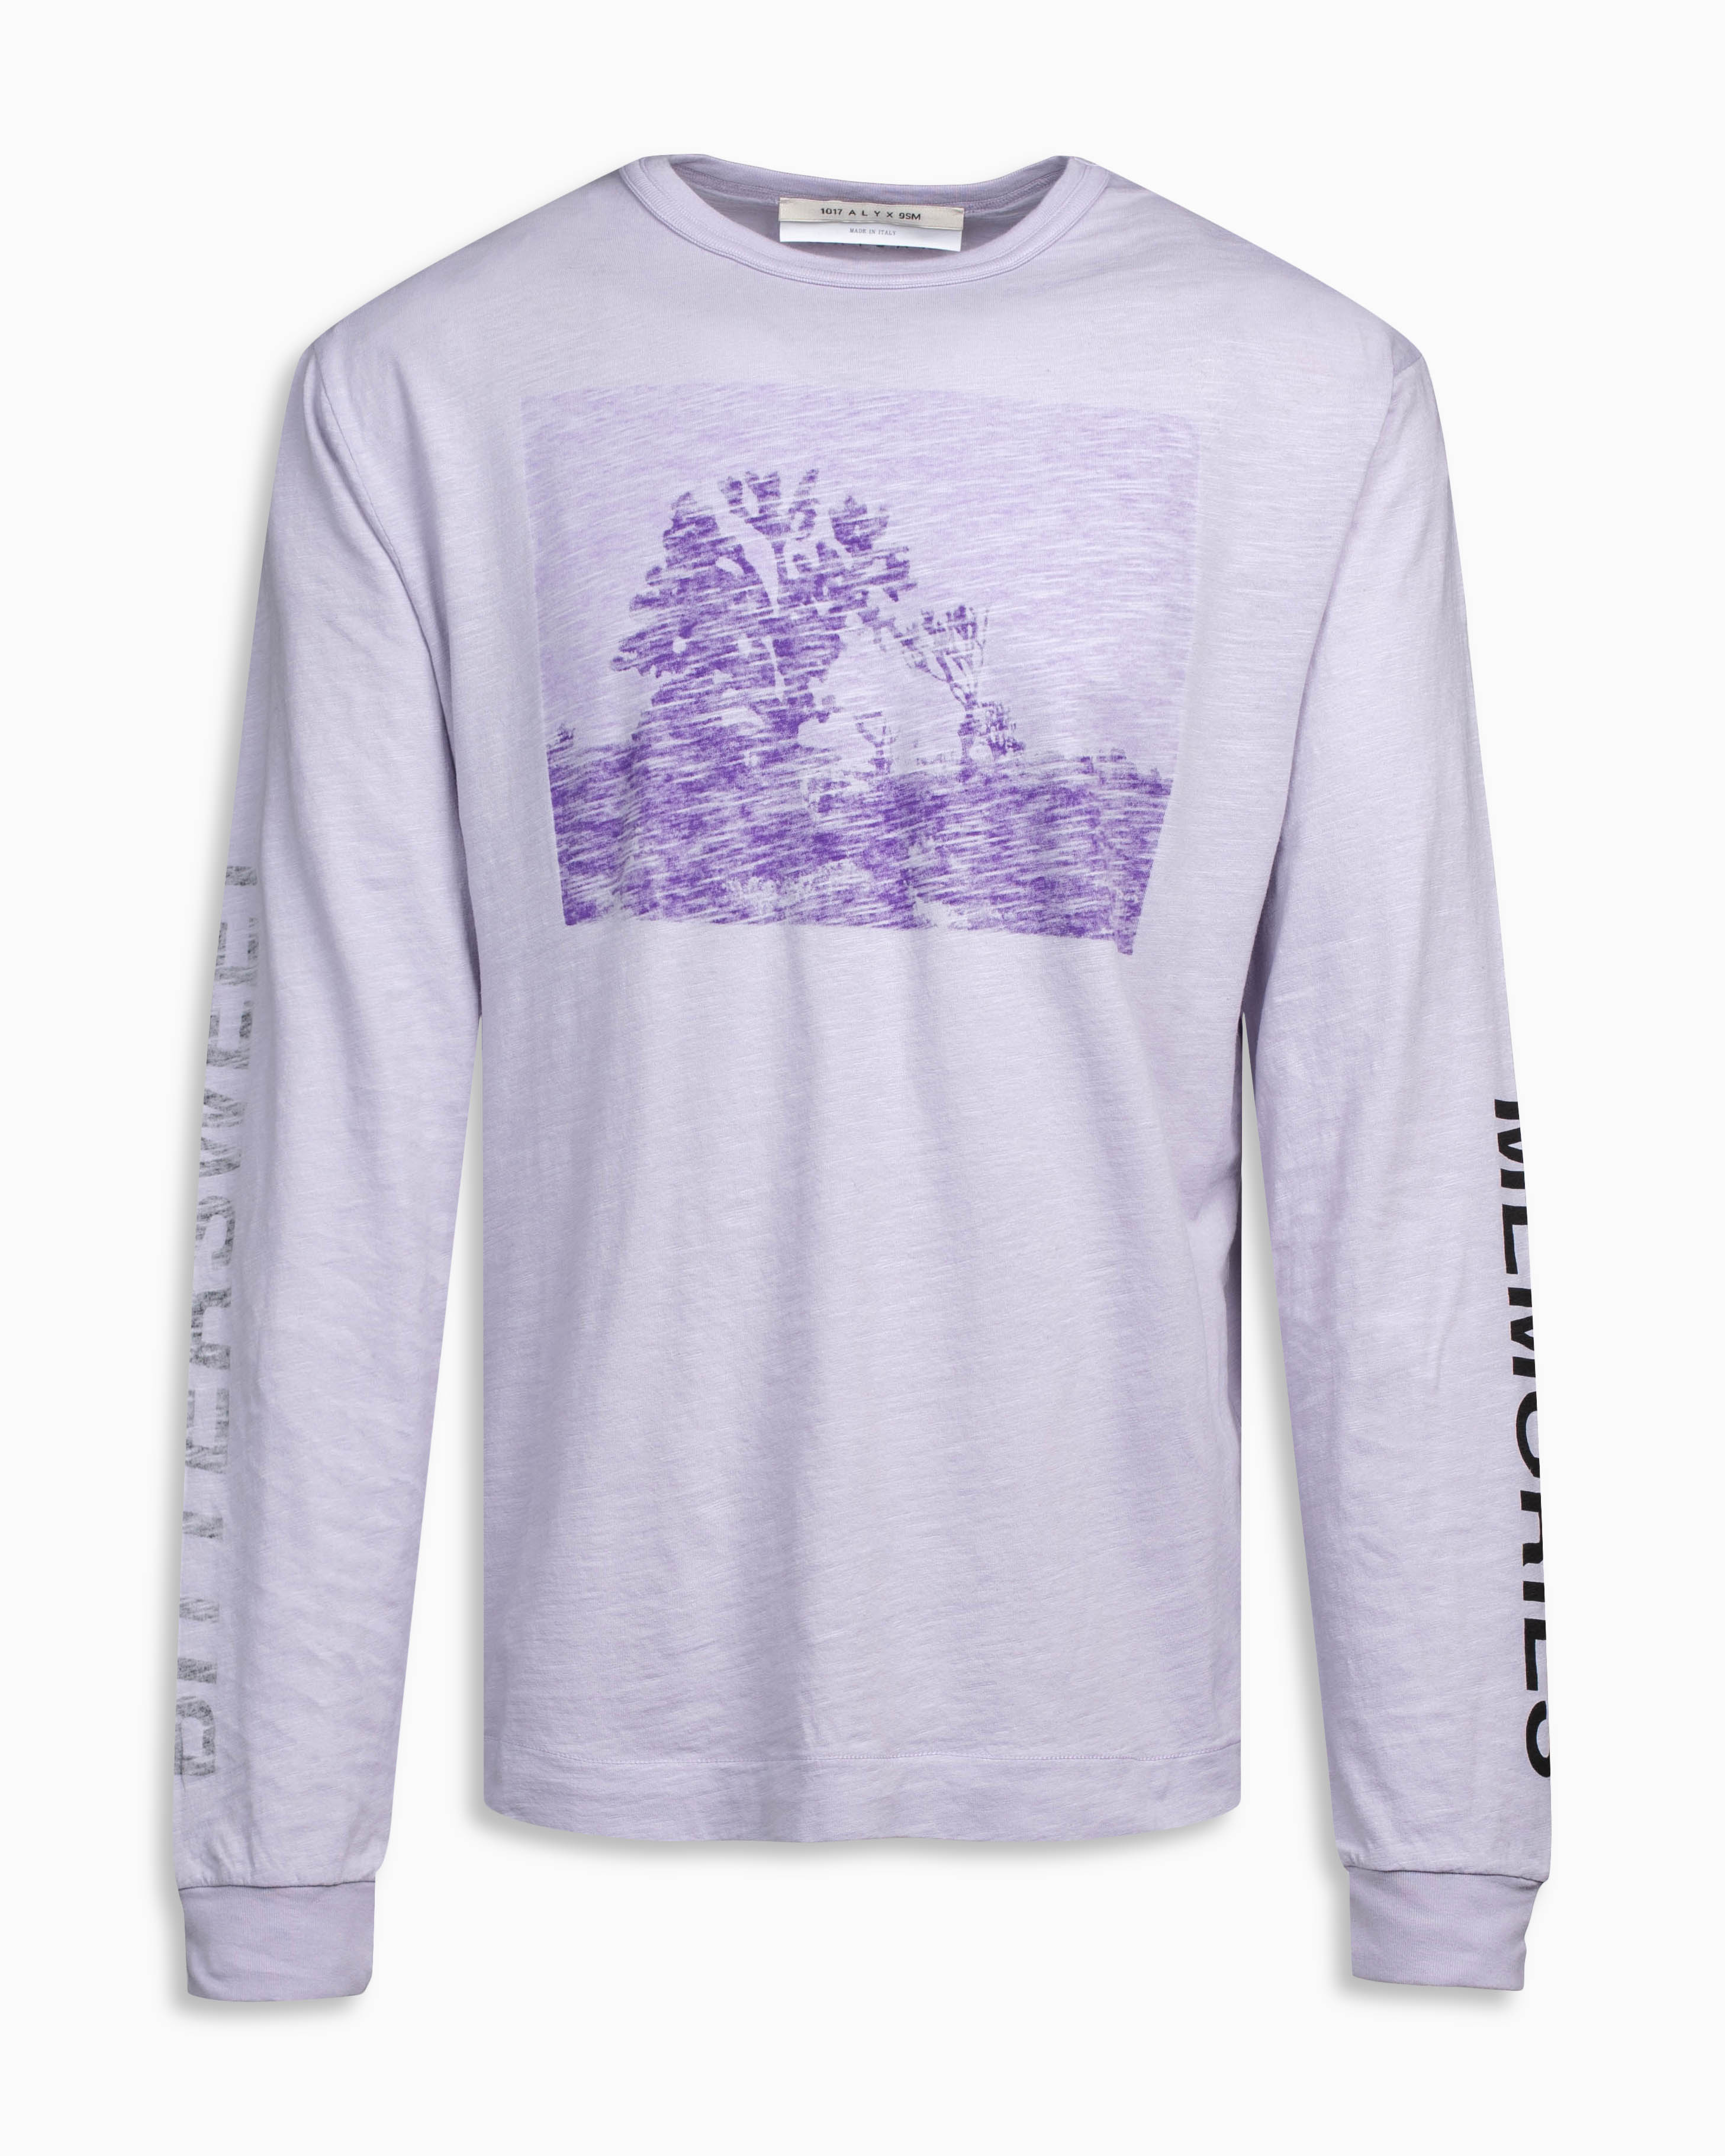 Graphic L/S T-shirt 1017 ALYX 9SM Tops Long Sleeves Purple